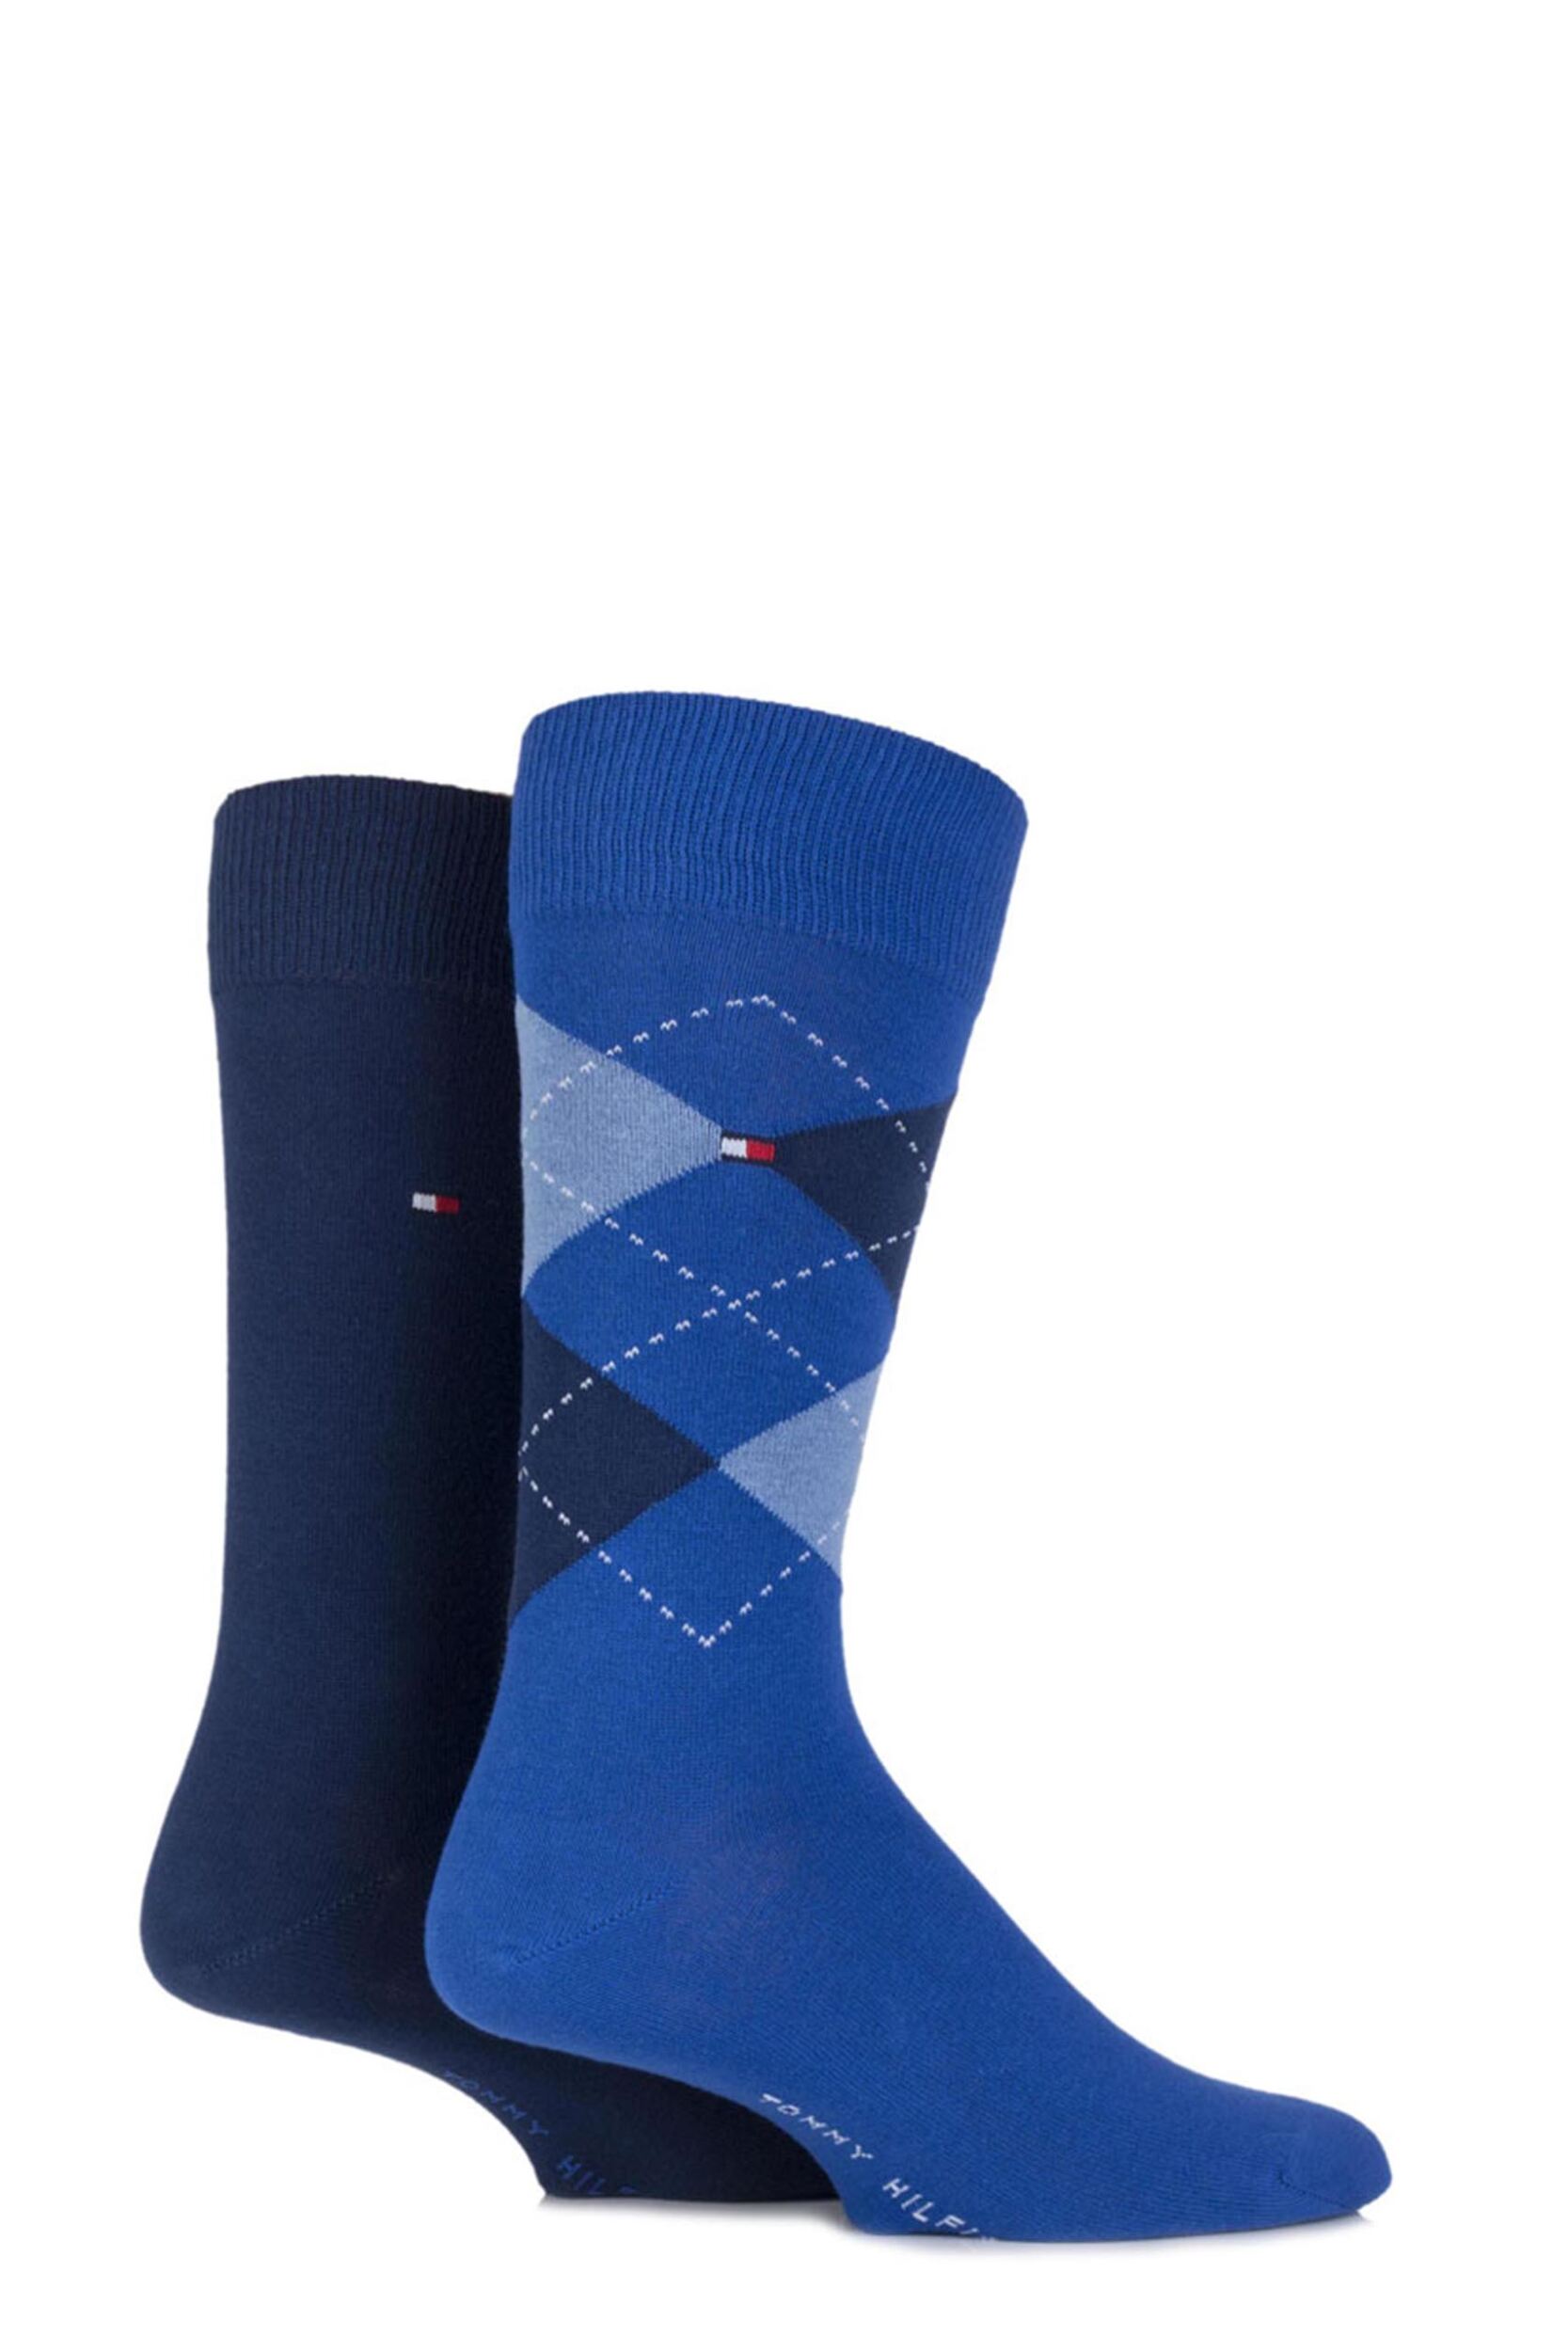 Mens 2 Pair Tommy Hilfiger Classic Tommy Argyle and Plain Socks | eBay